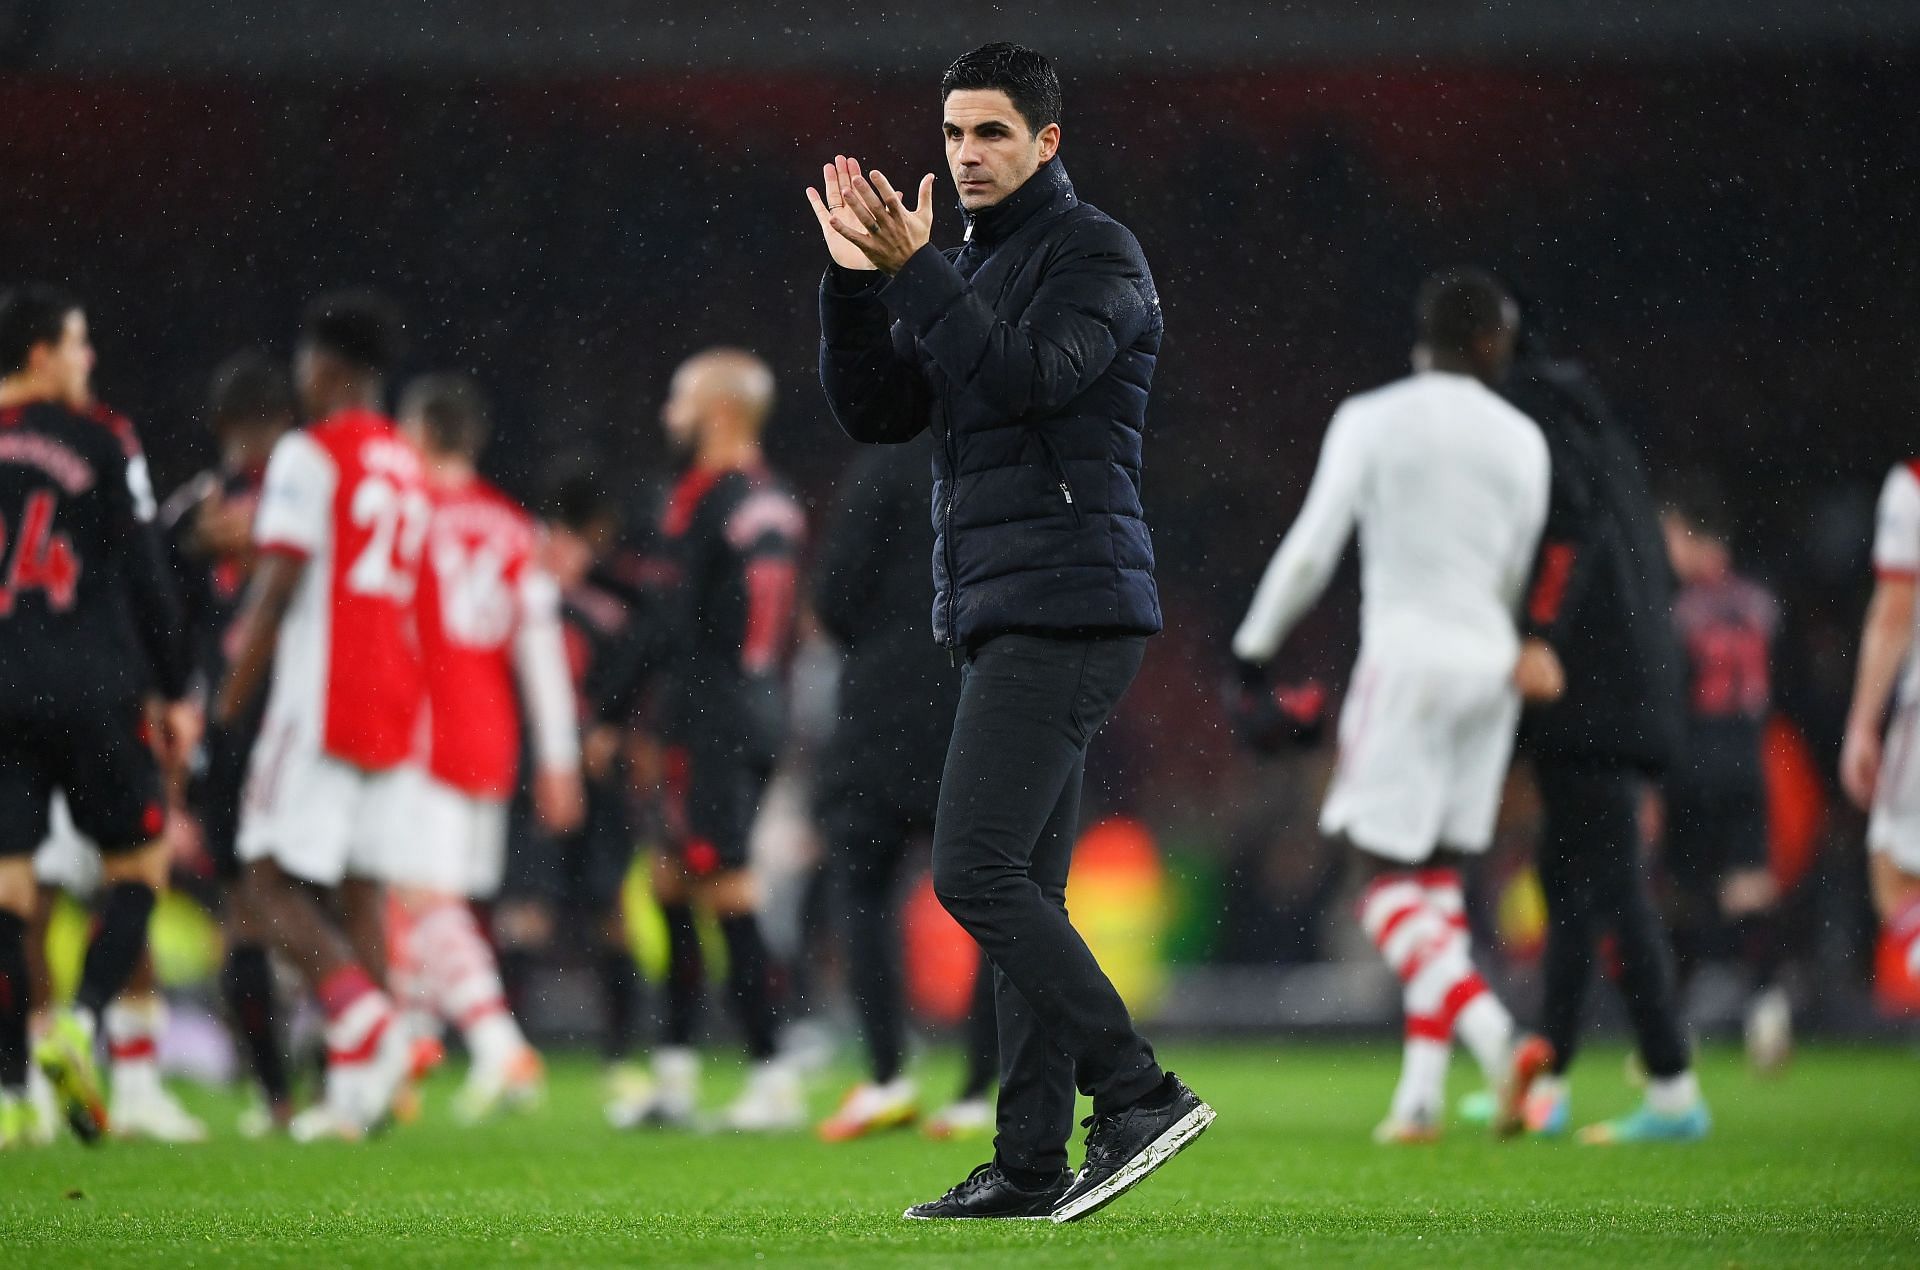 Arsenal manager Mikel Arteta is preparing to welcome West Ham United to the Emirates.